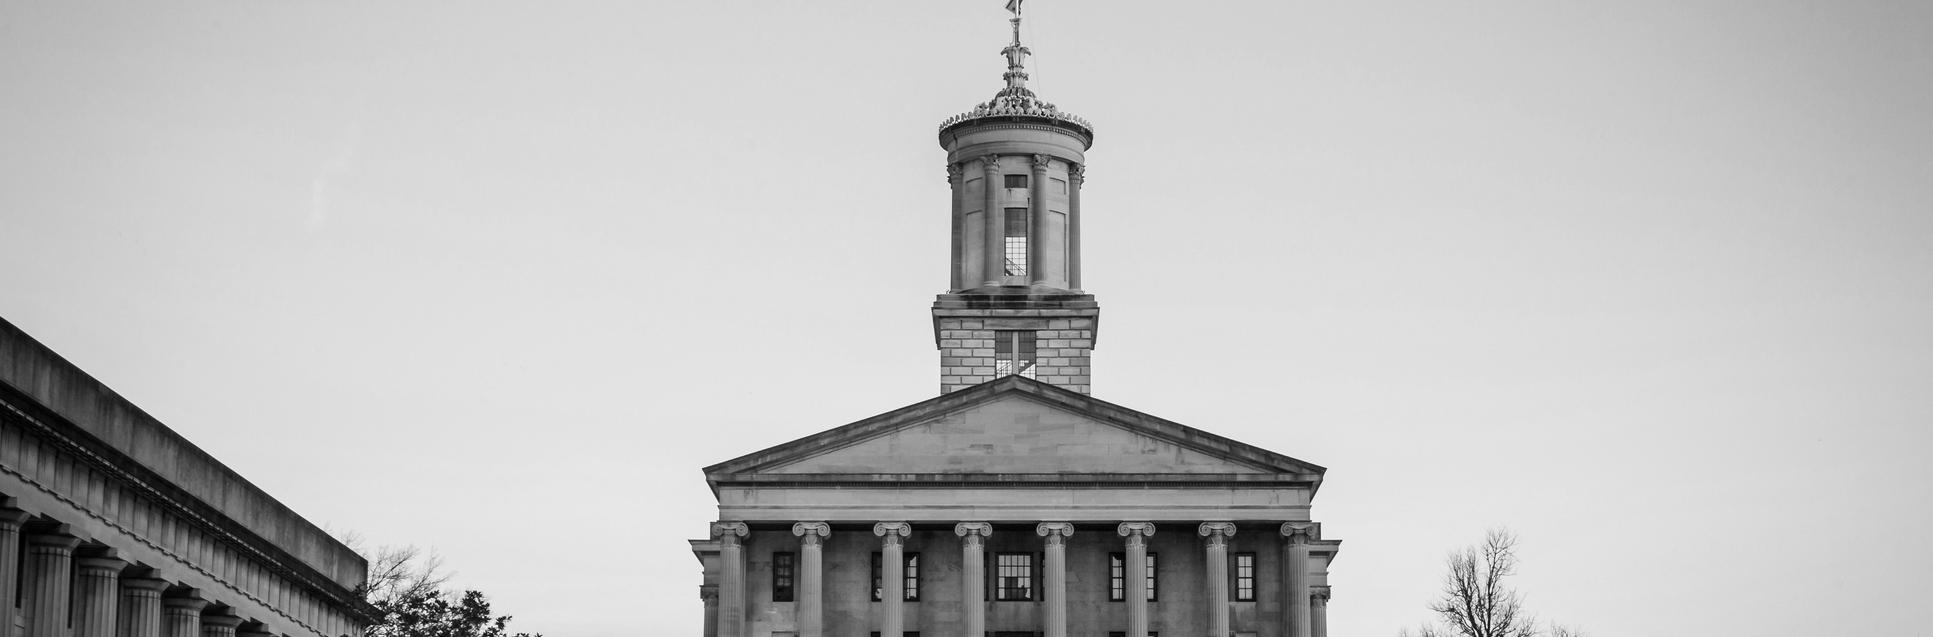 Image of Tennessee capitol building